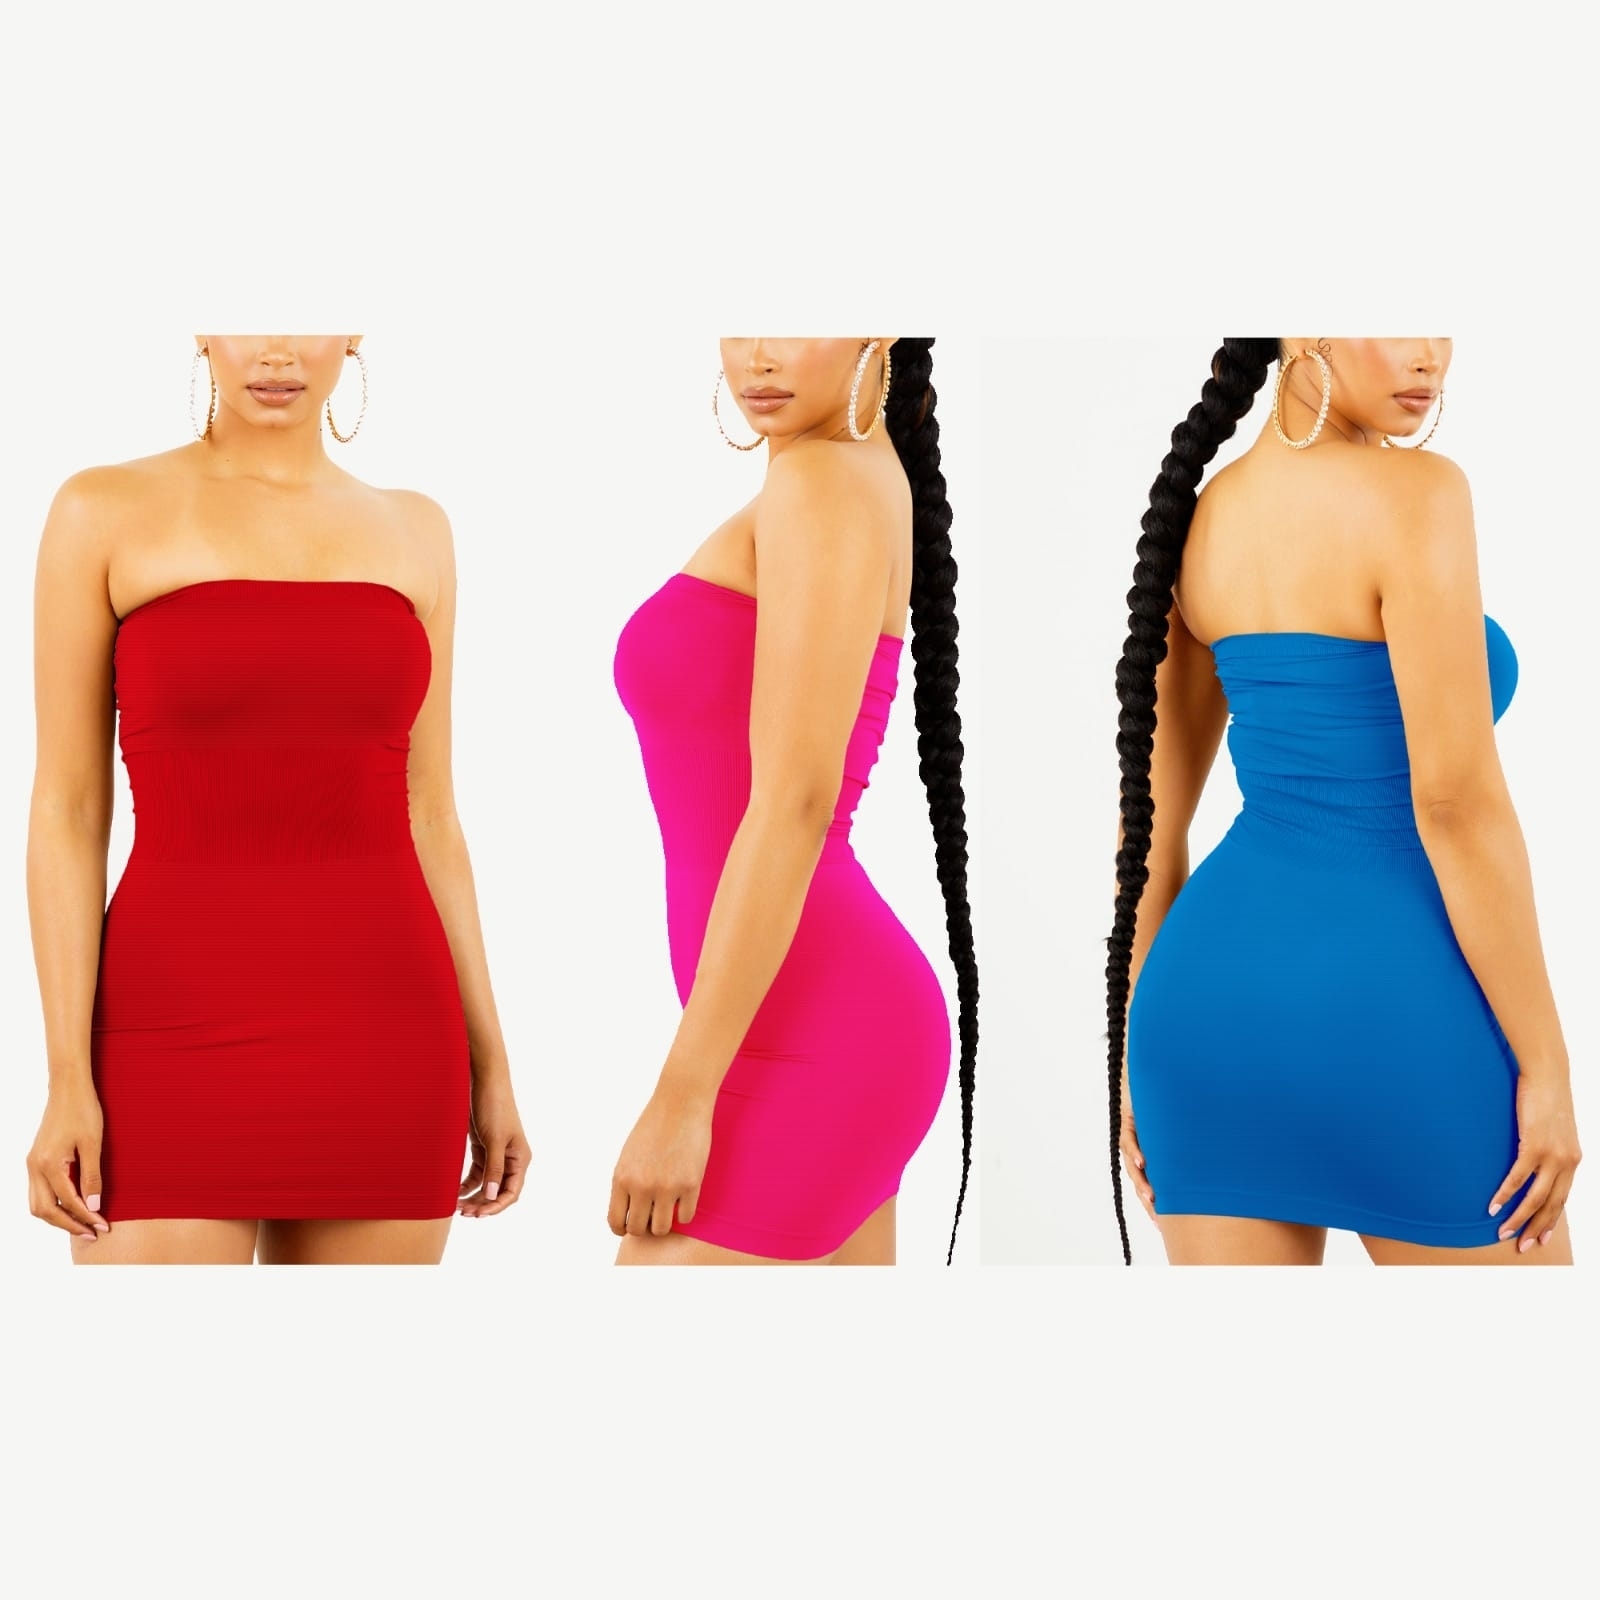 2-Pack Women's Strapless Stretchy Tight Fit Seamless Body Con Mini Tube Top Dress - PINK, XL